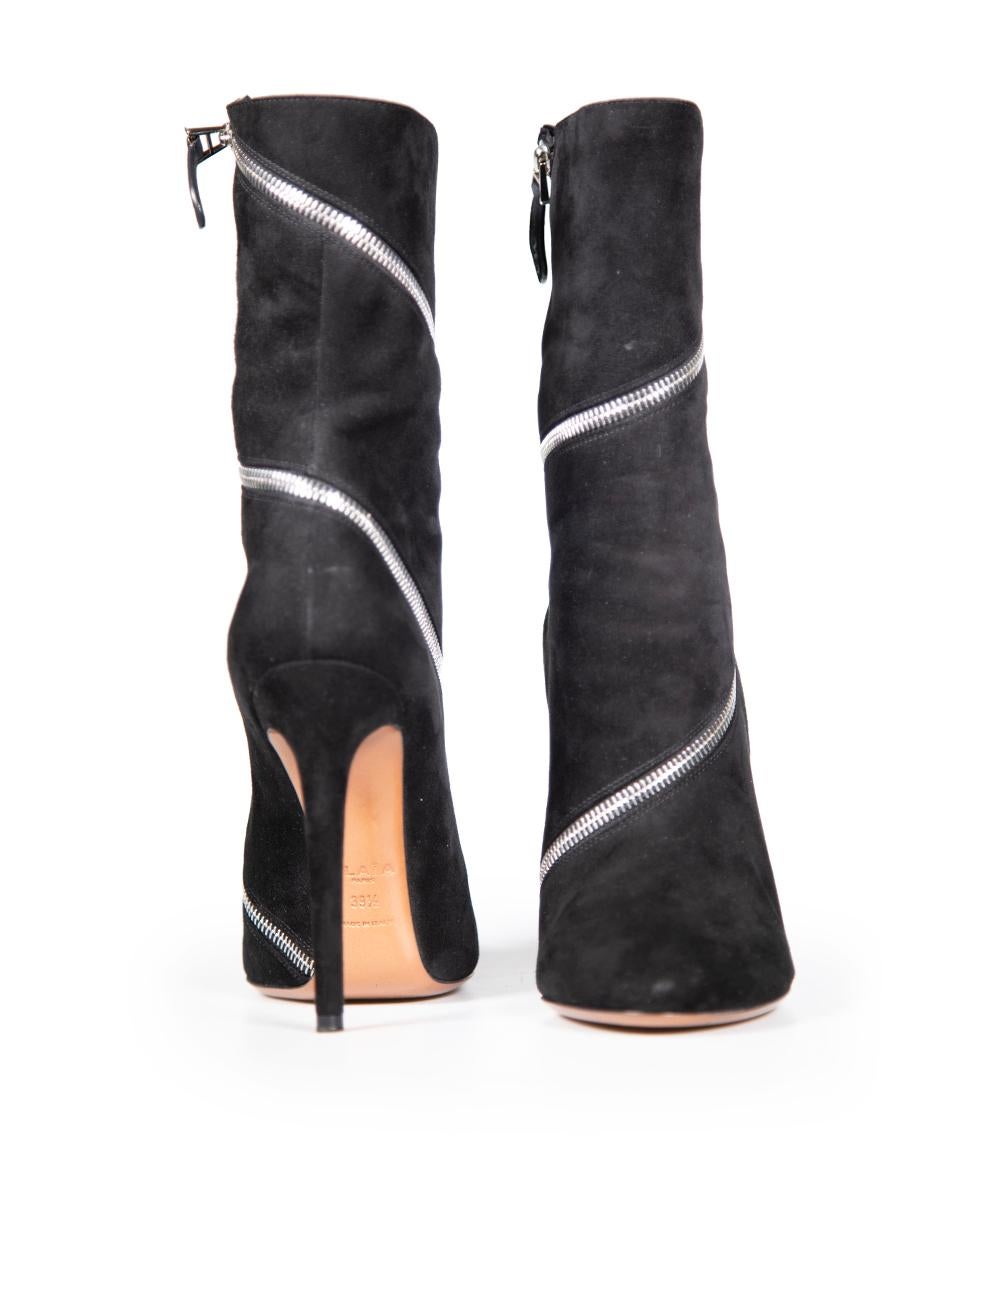 Alaïa Black Suede Zip Detail Mid Calf Boots Size IT 39.5 In Good Condition For Sale In London, GB